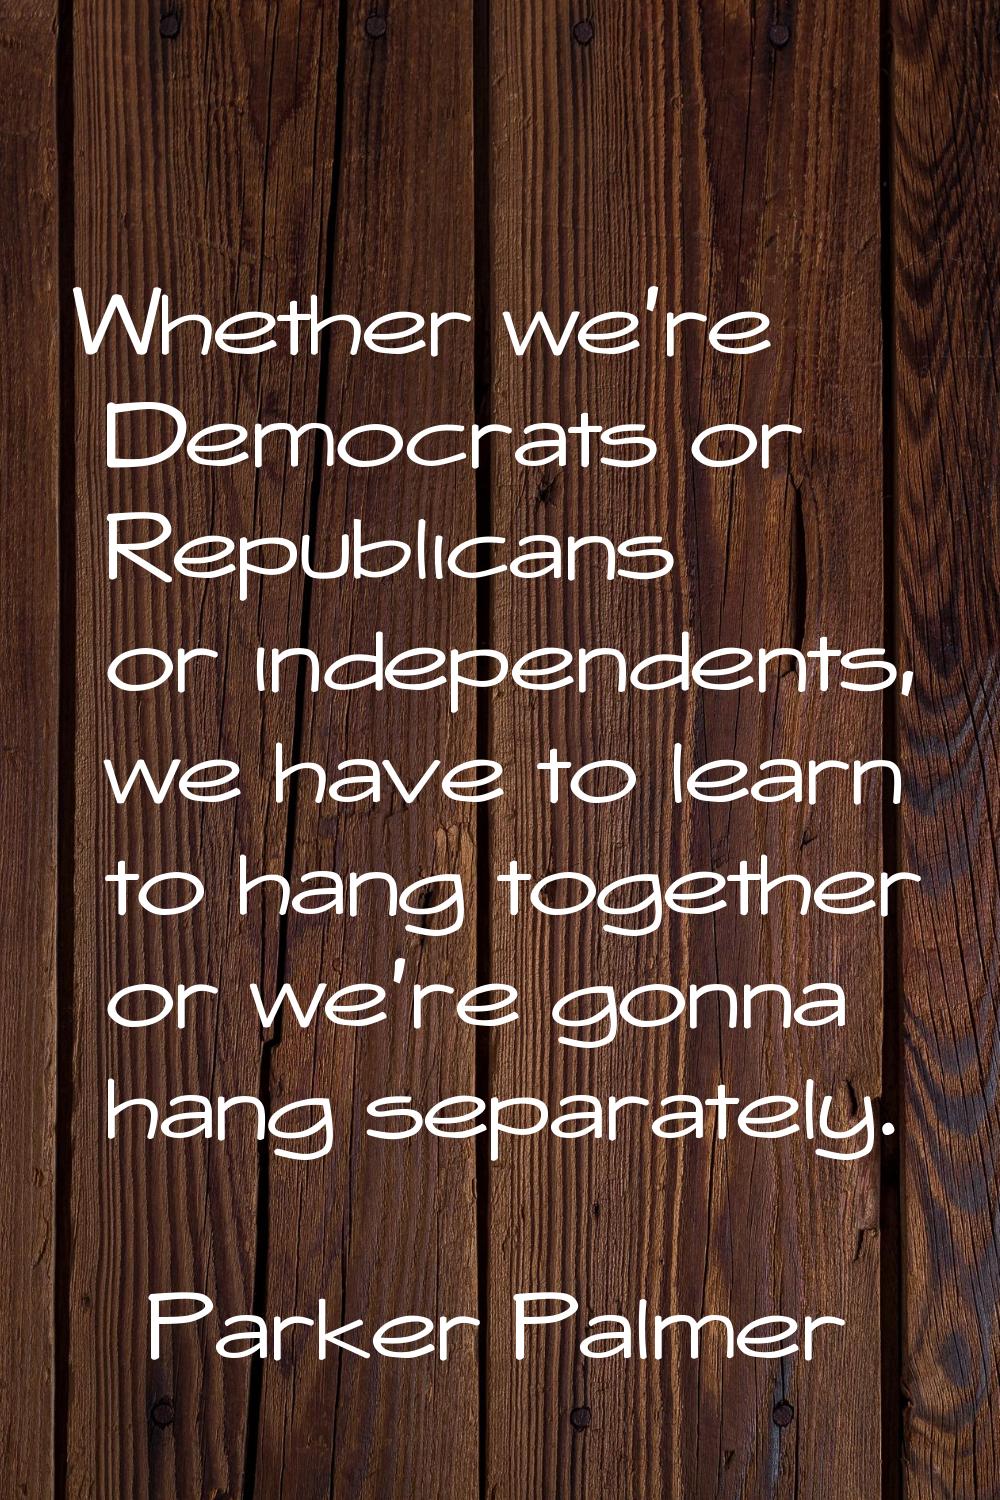 Whether we're Democrats or Republicans or independents, we have to learn to hang together or we're 